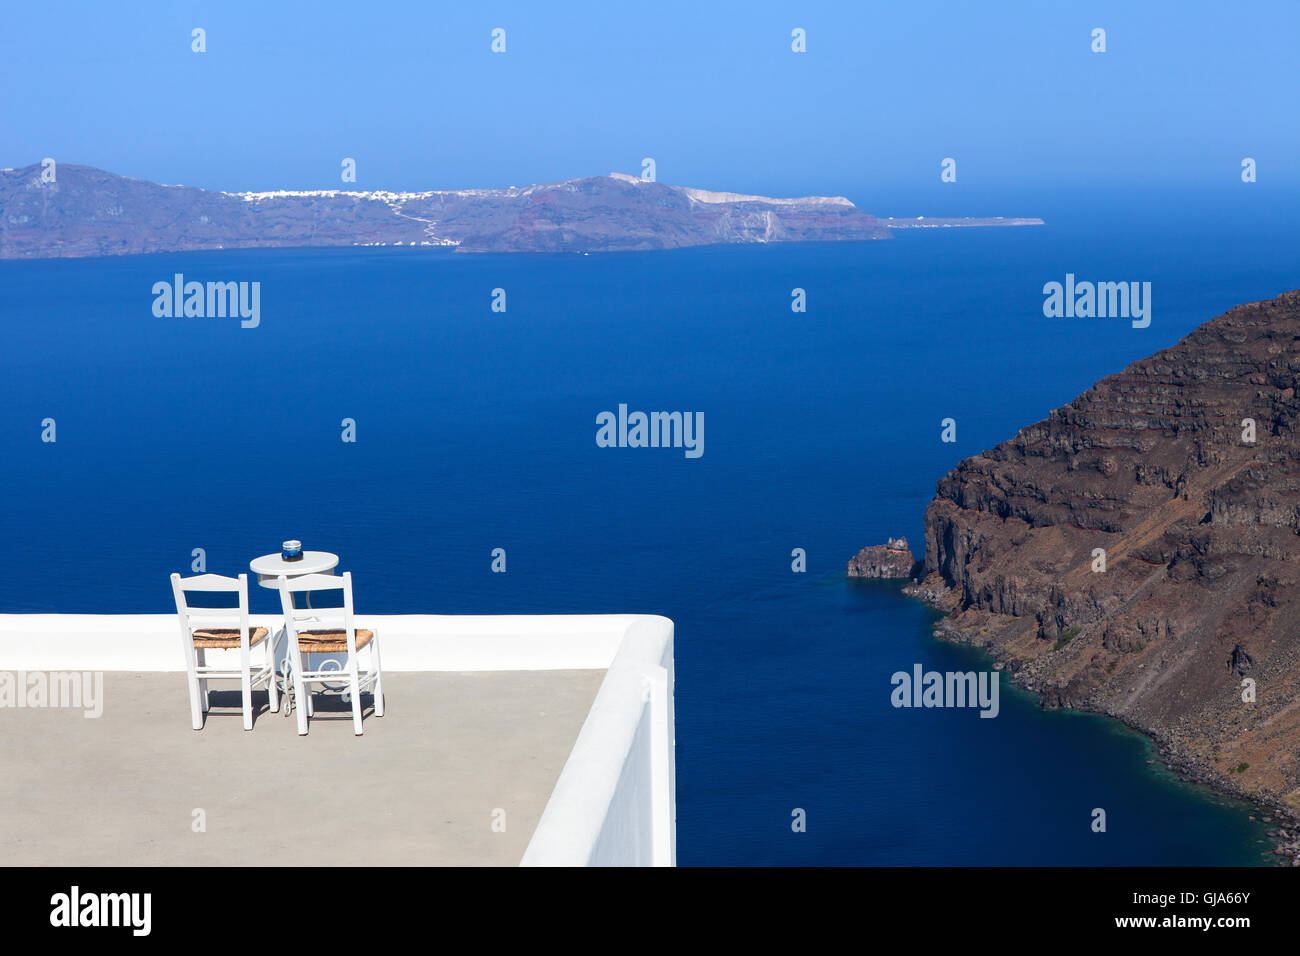 White houses of Fira, Santorini with Santorini's famous volcano in the background Stock Photo